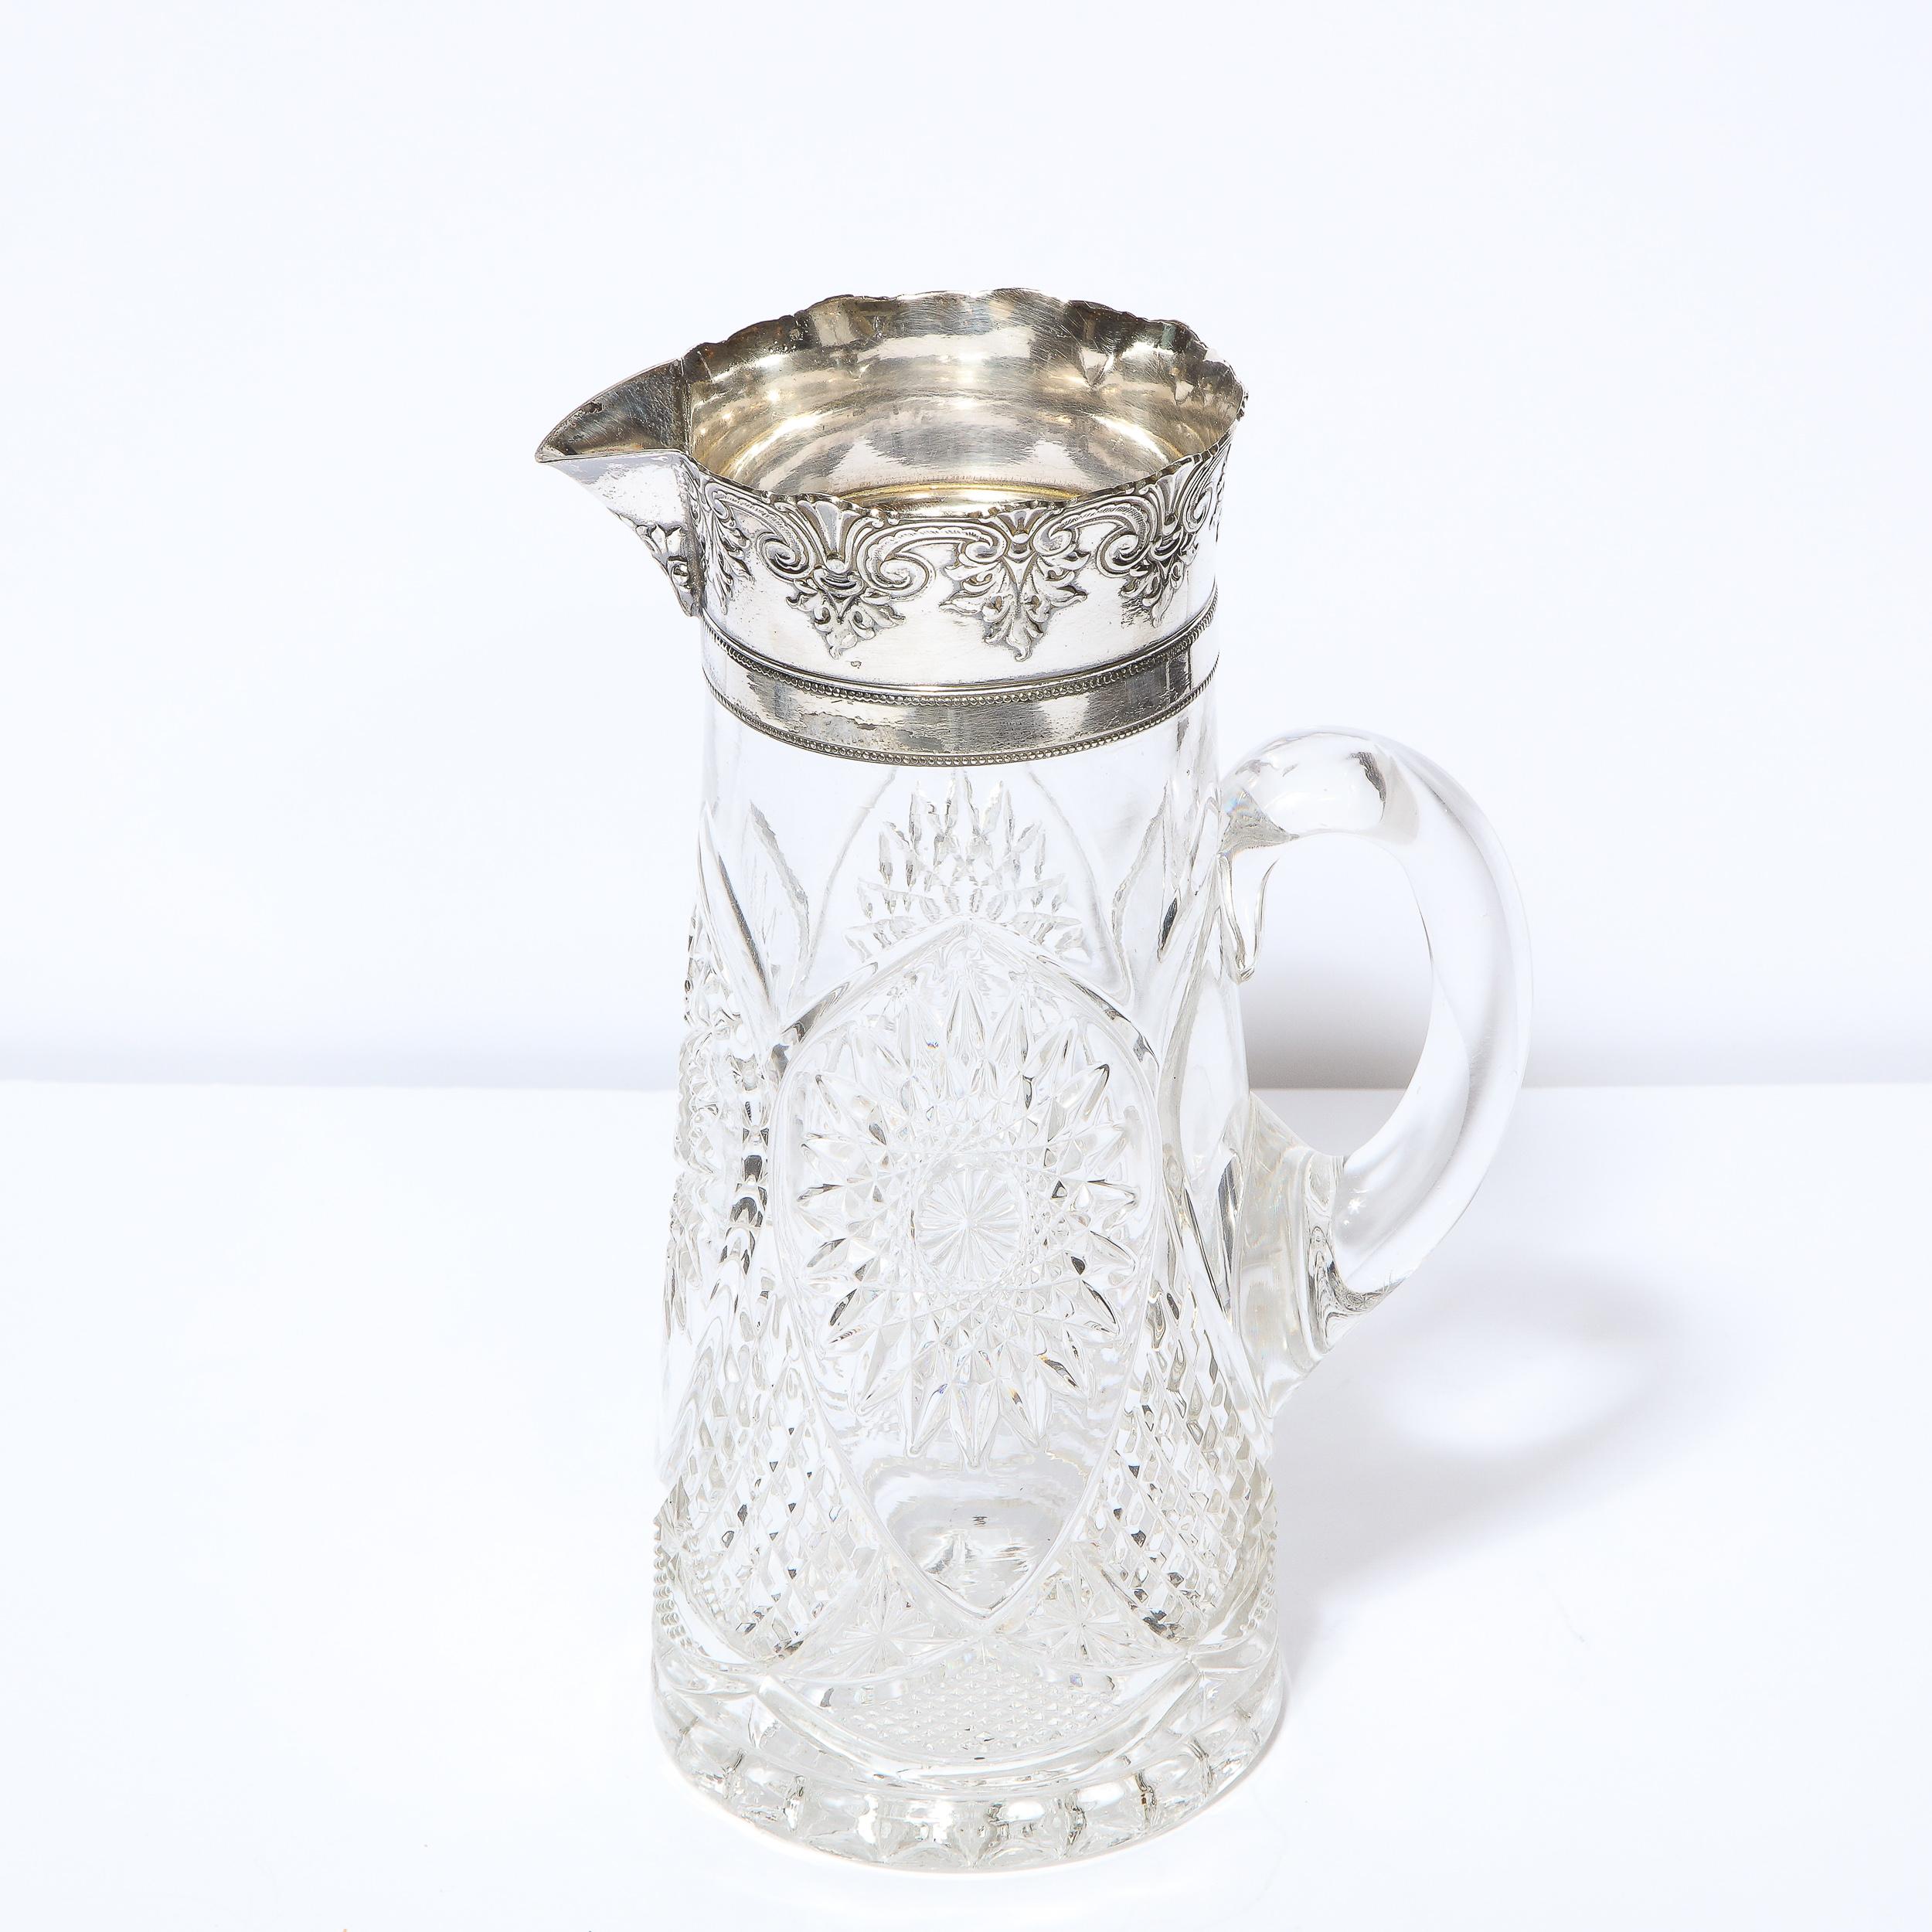 1940s Art Deco Pressed Glass Pitcher with Geometric Details & Silver Plated Top 6